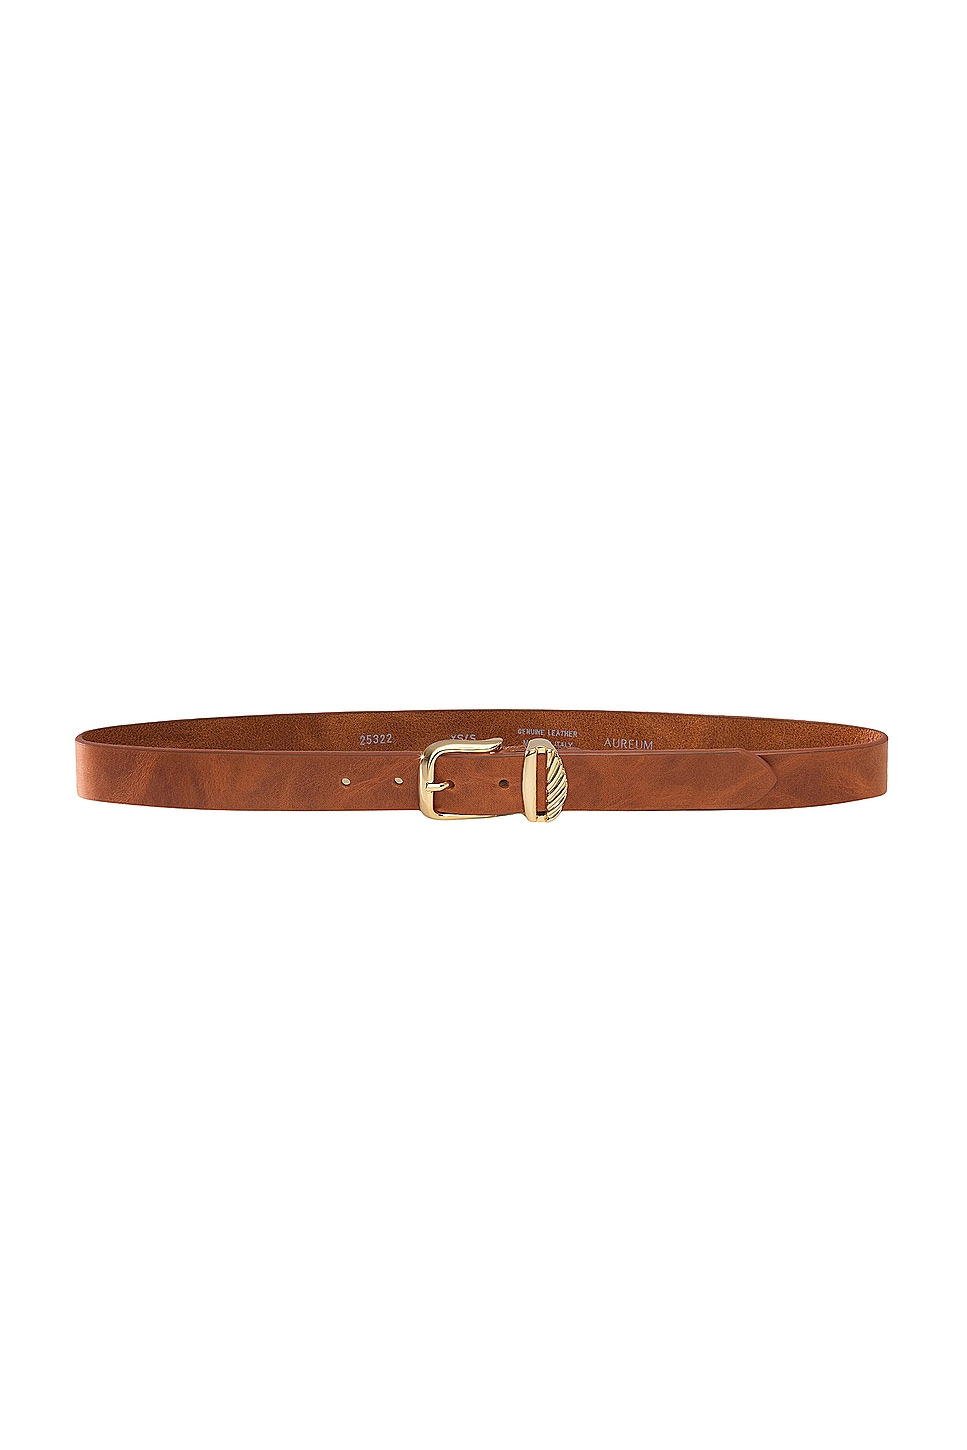 French Rope Belt in Cognac